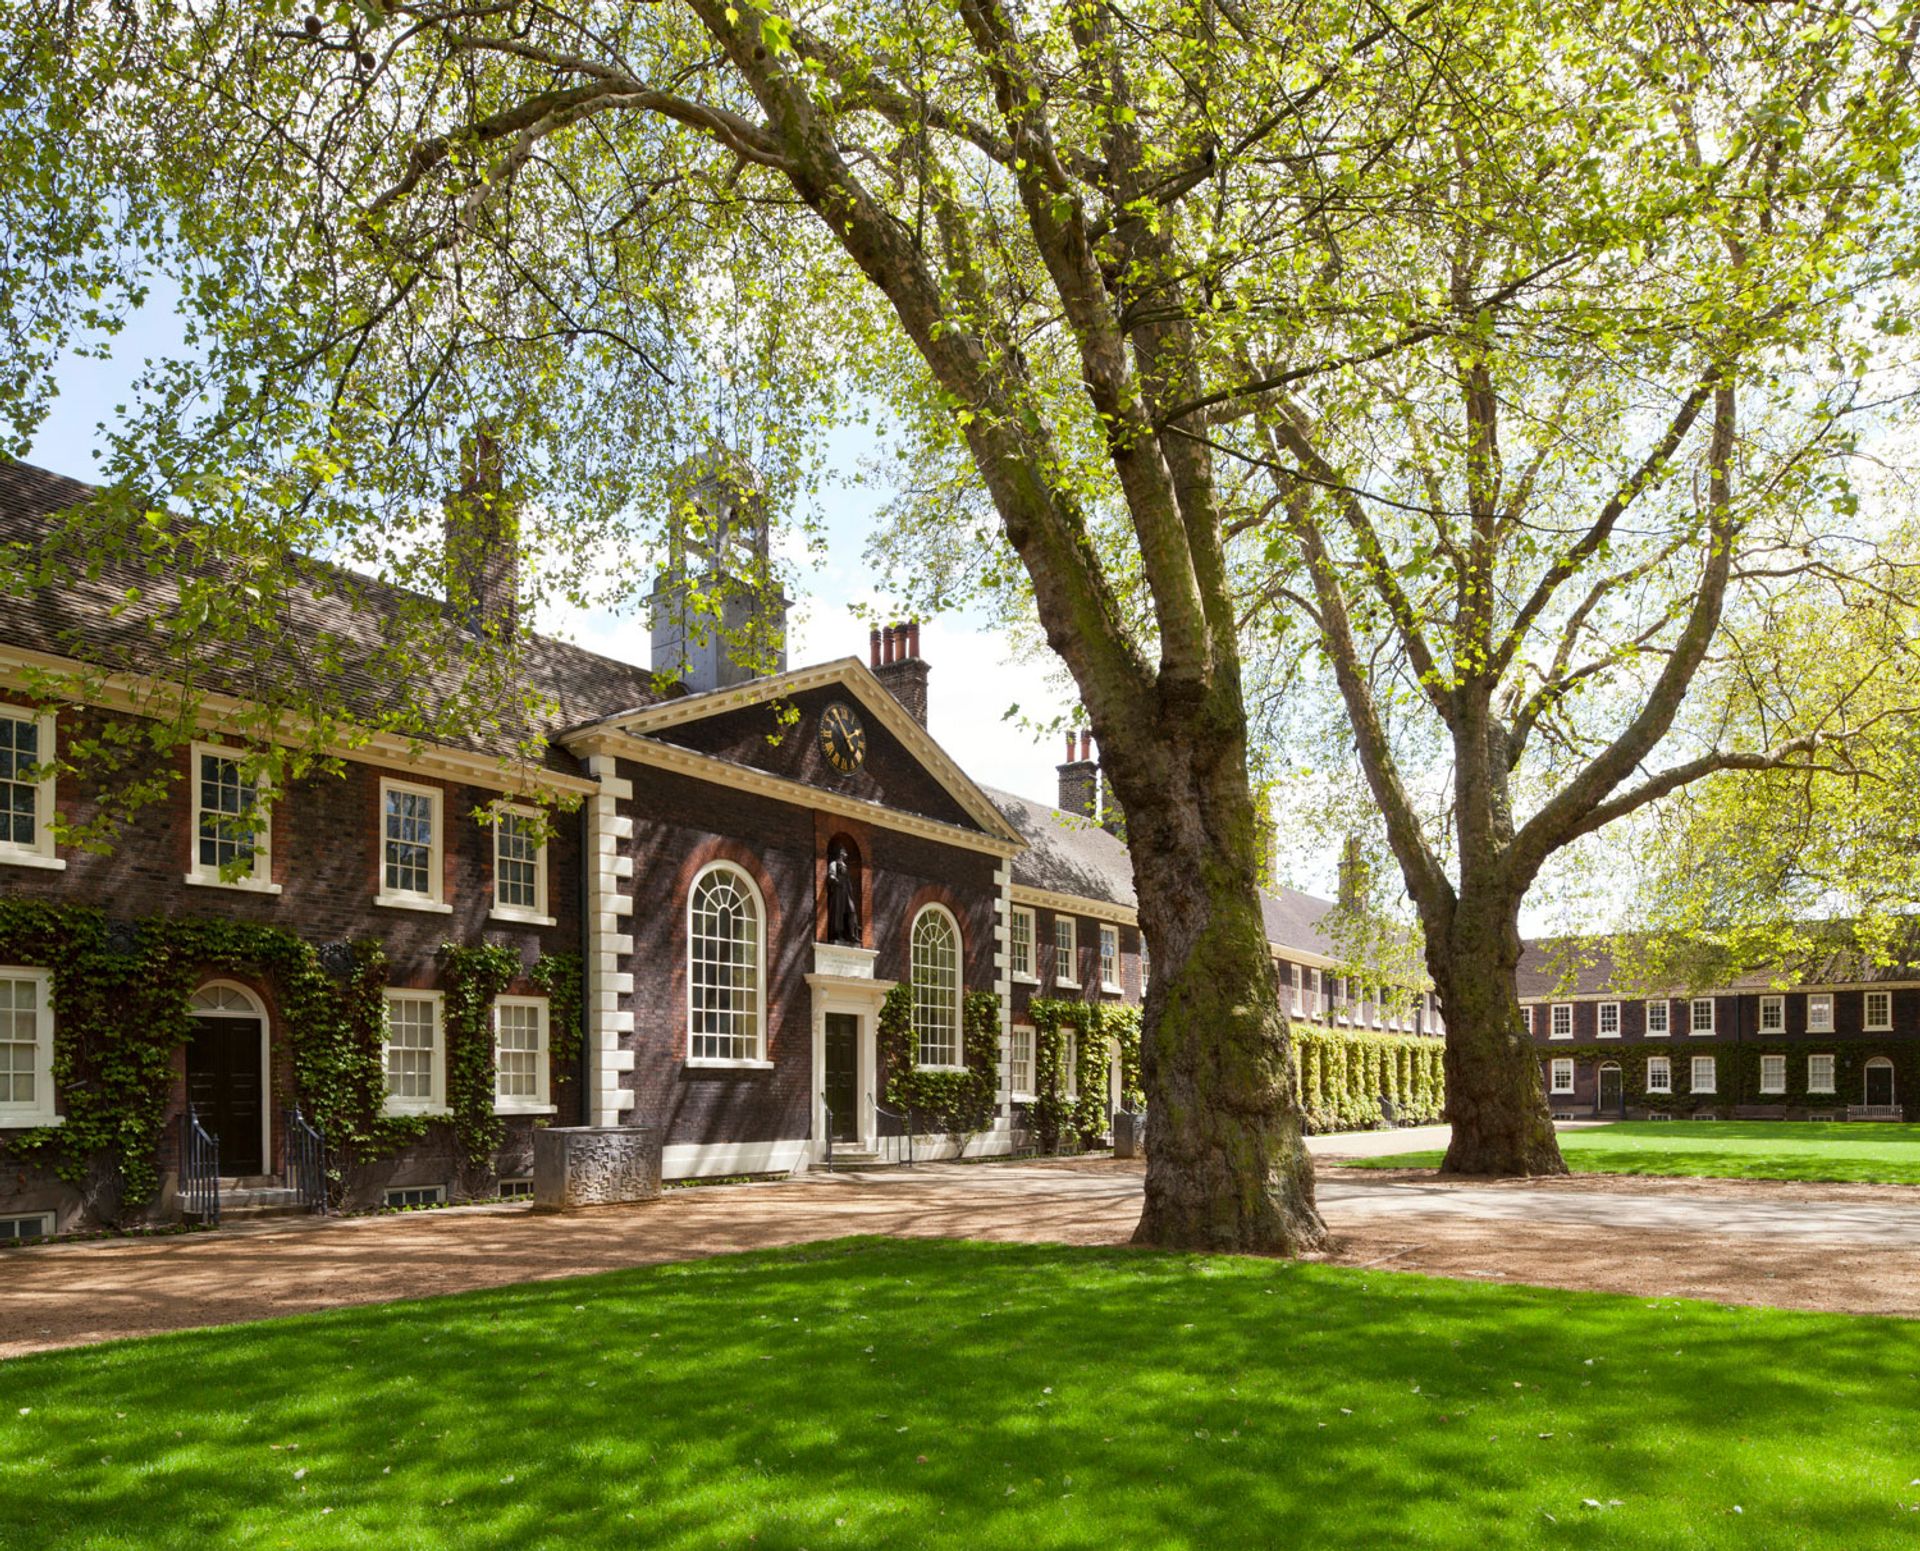 The Museum of the Home, set within 300-year-old almshouse buildings in east London, reopens on 12 June after an £18.8m refurbishment Photo: Richard Davies